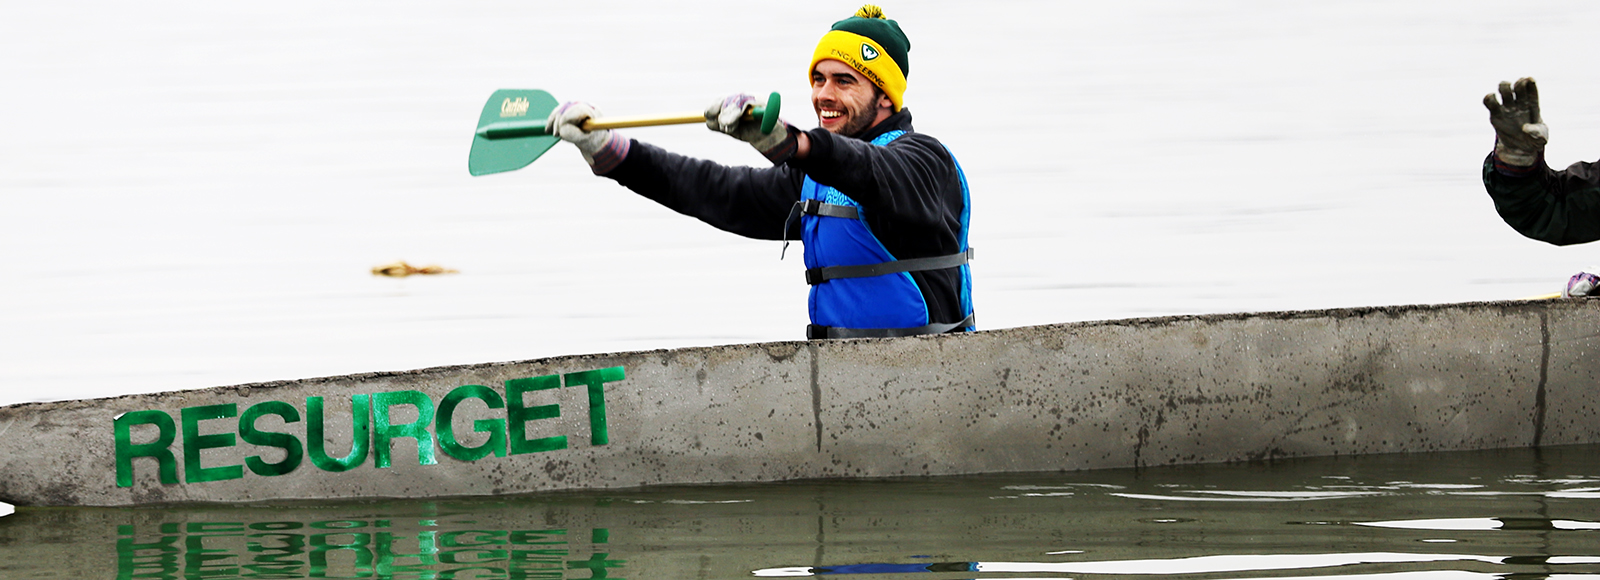 Wayne State student Kelvin Selegean of Clinton Township smiles after crossing the finish line in the men's concrete canoe race on March 31.